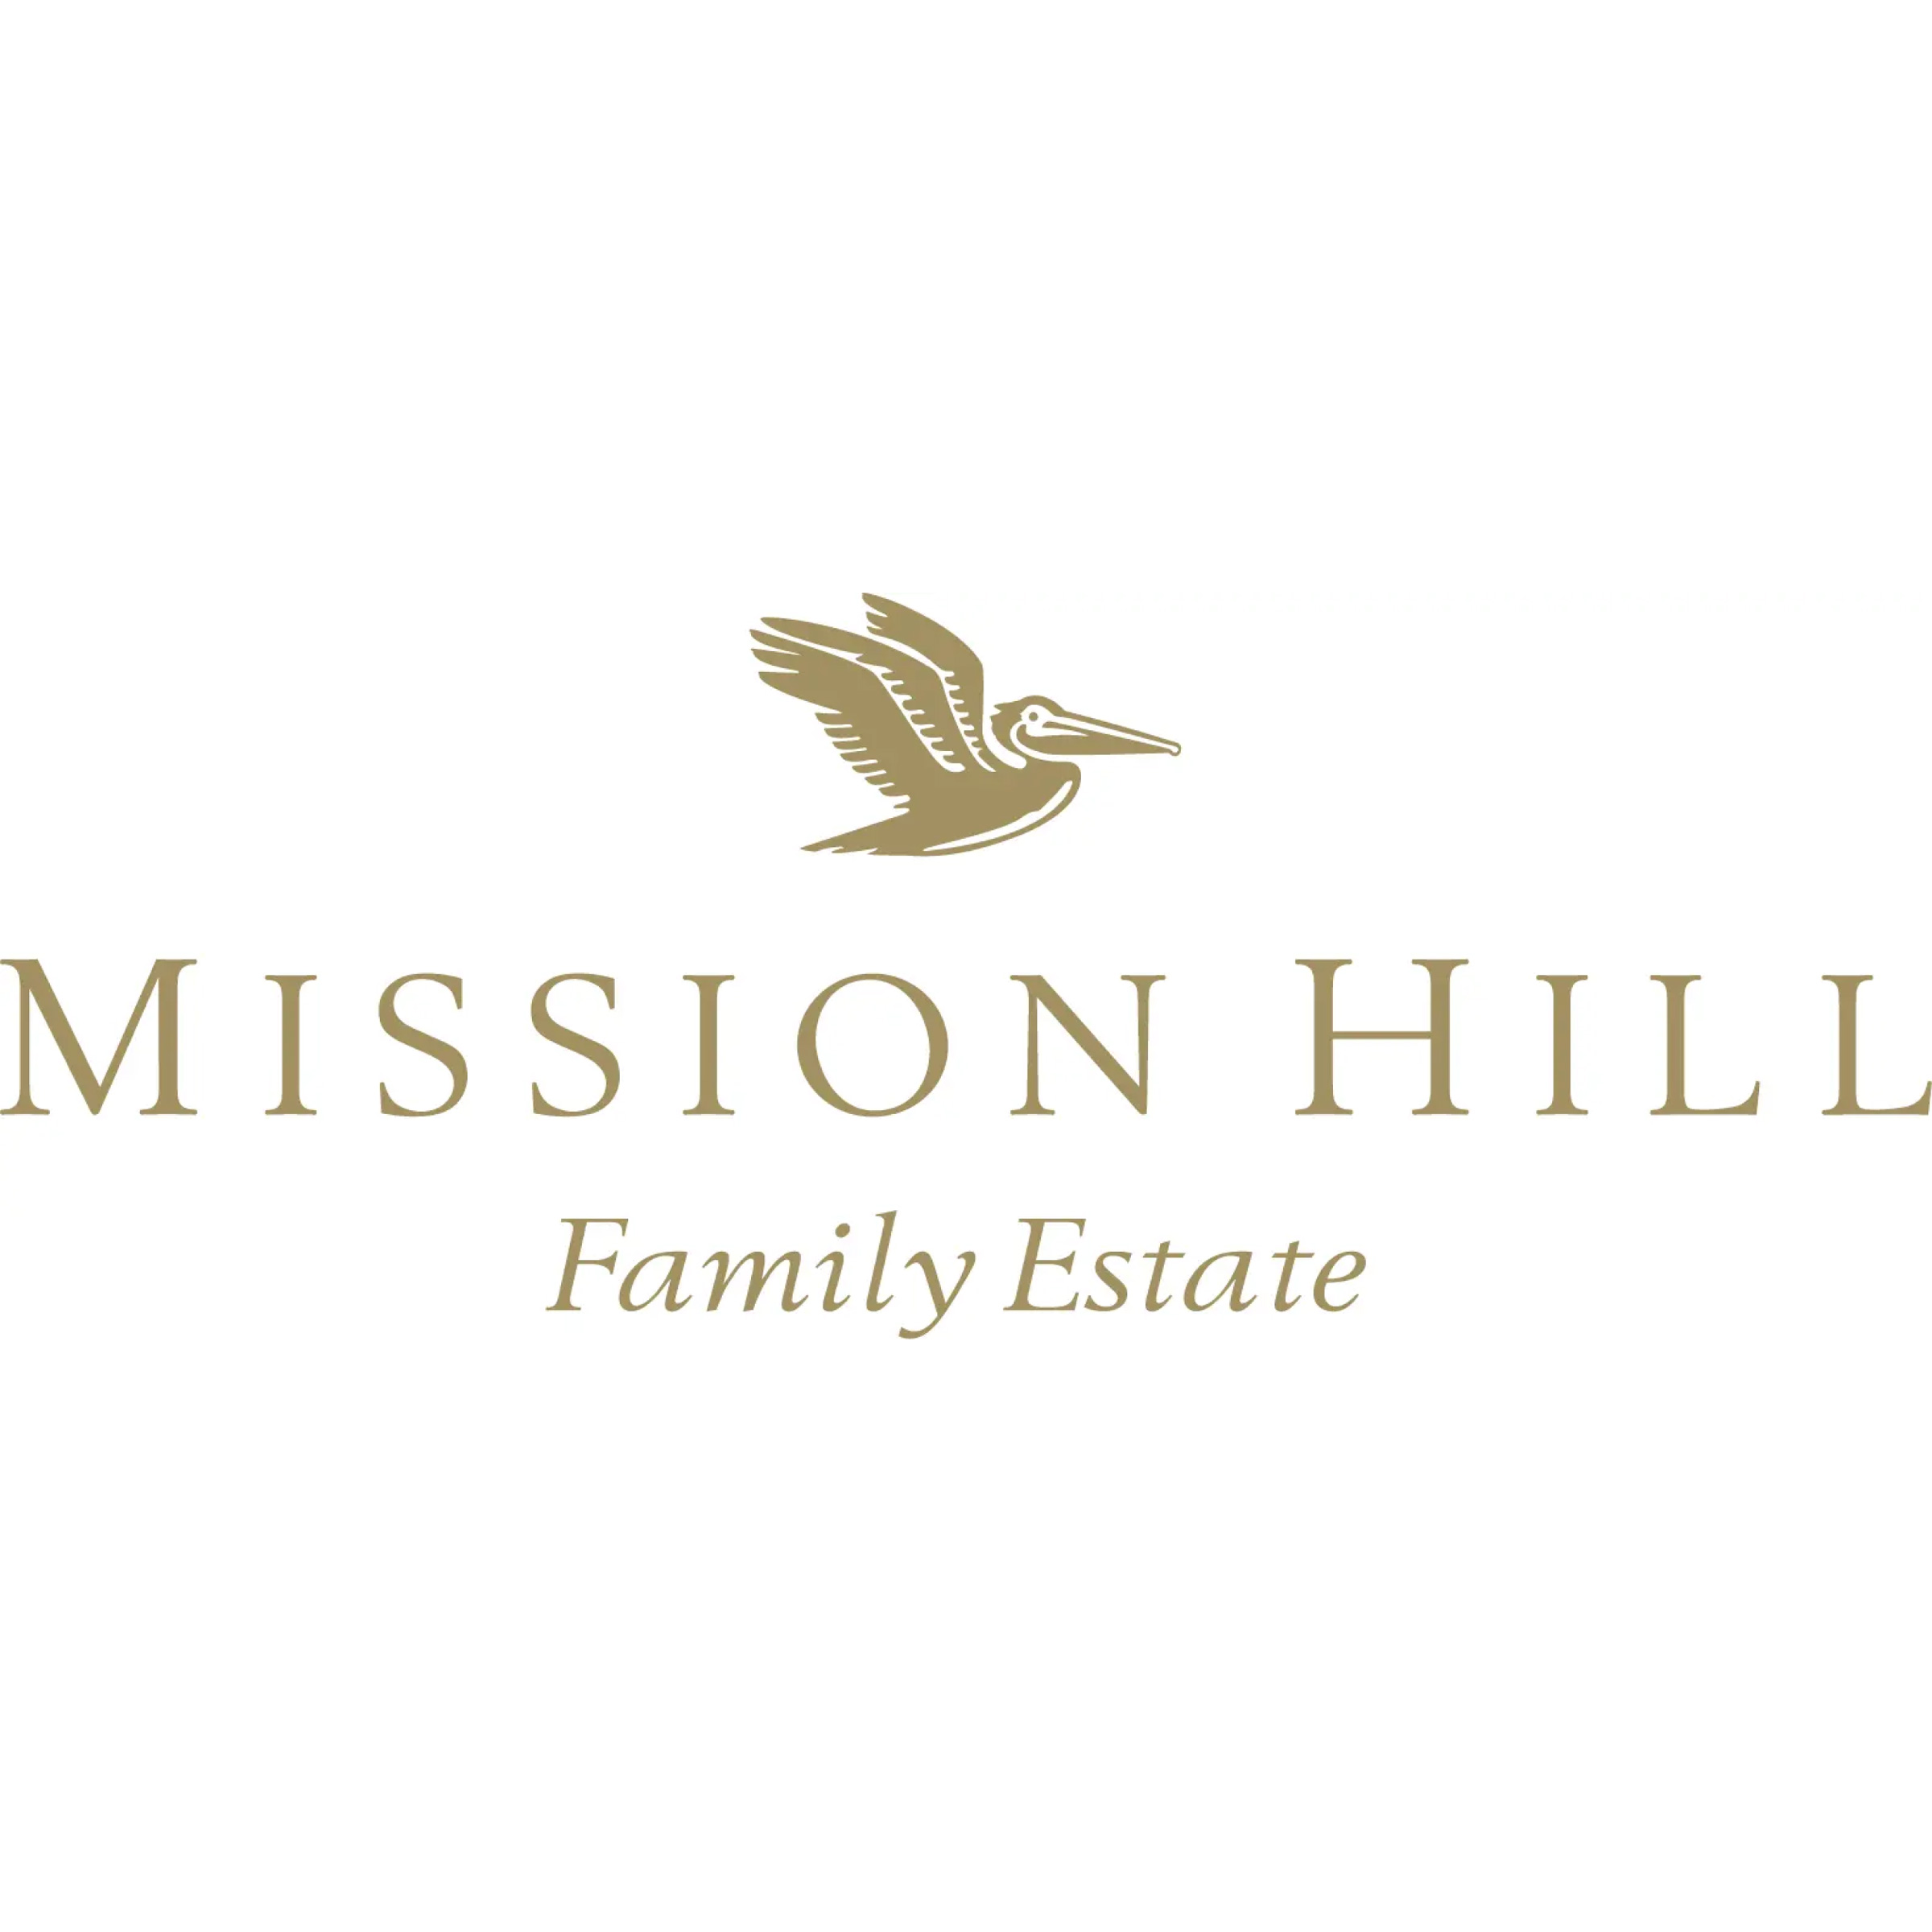 Mission Hill: 40 Years of Excellence